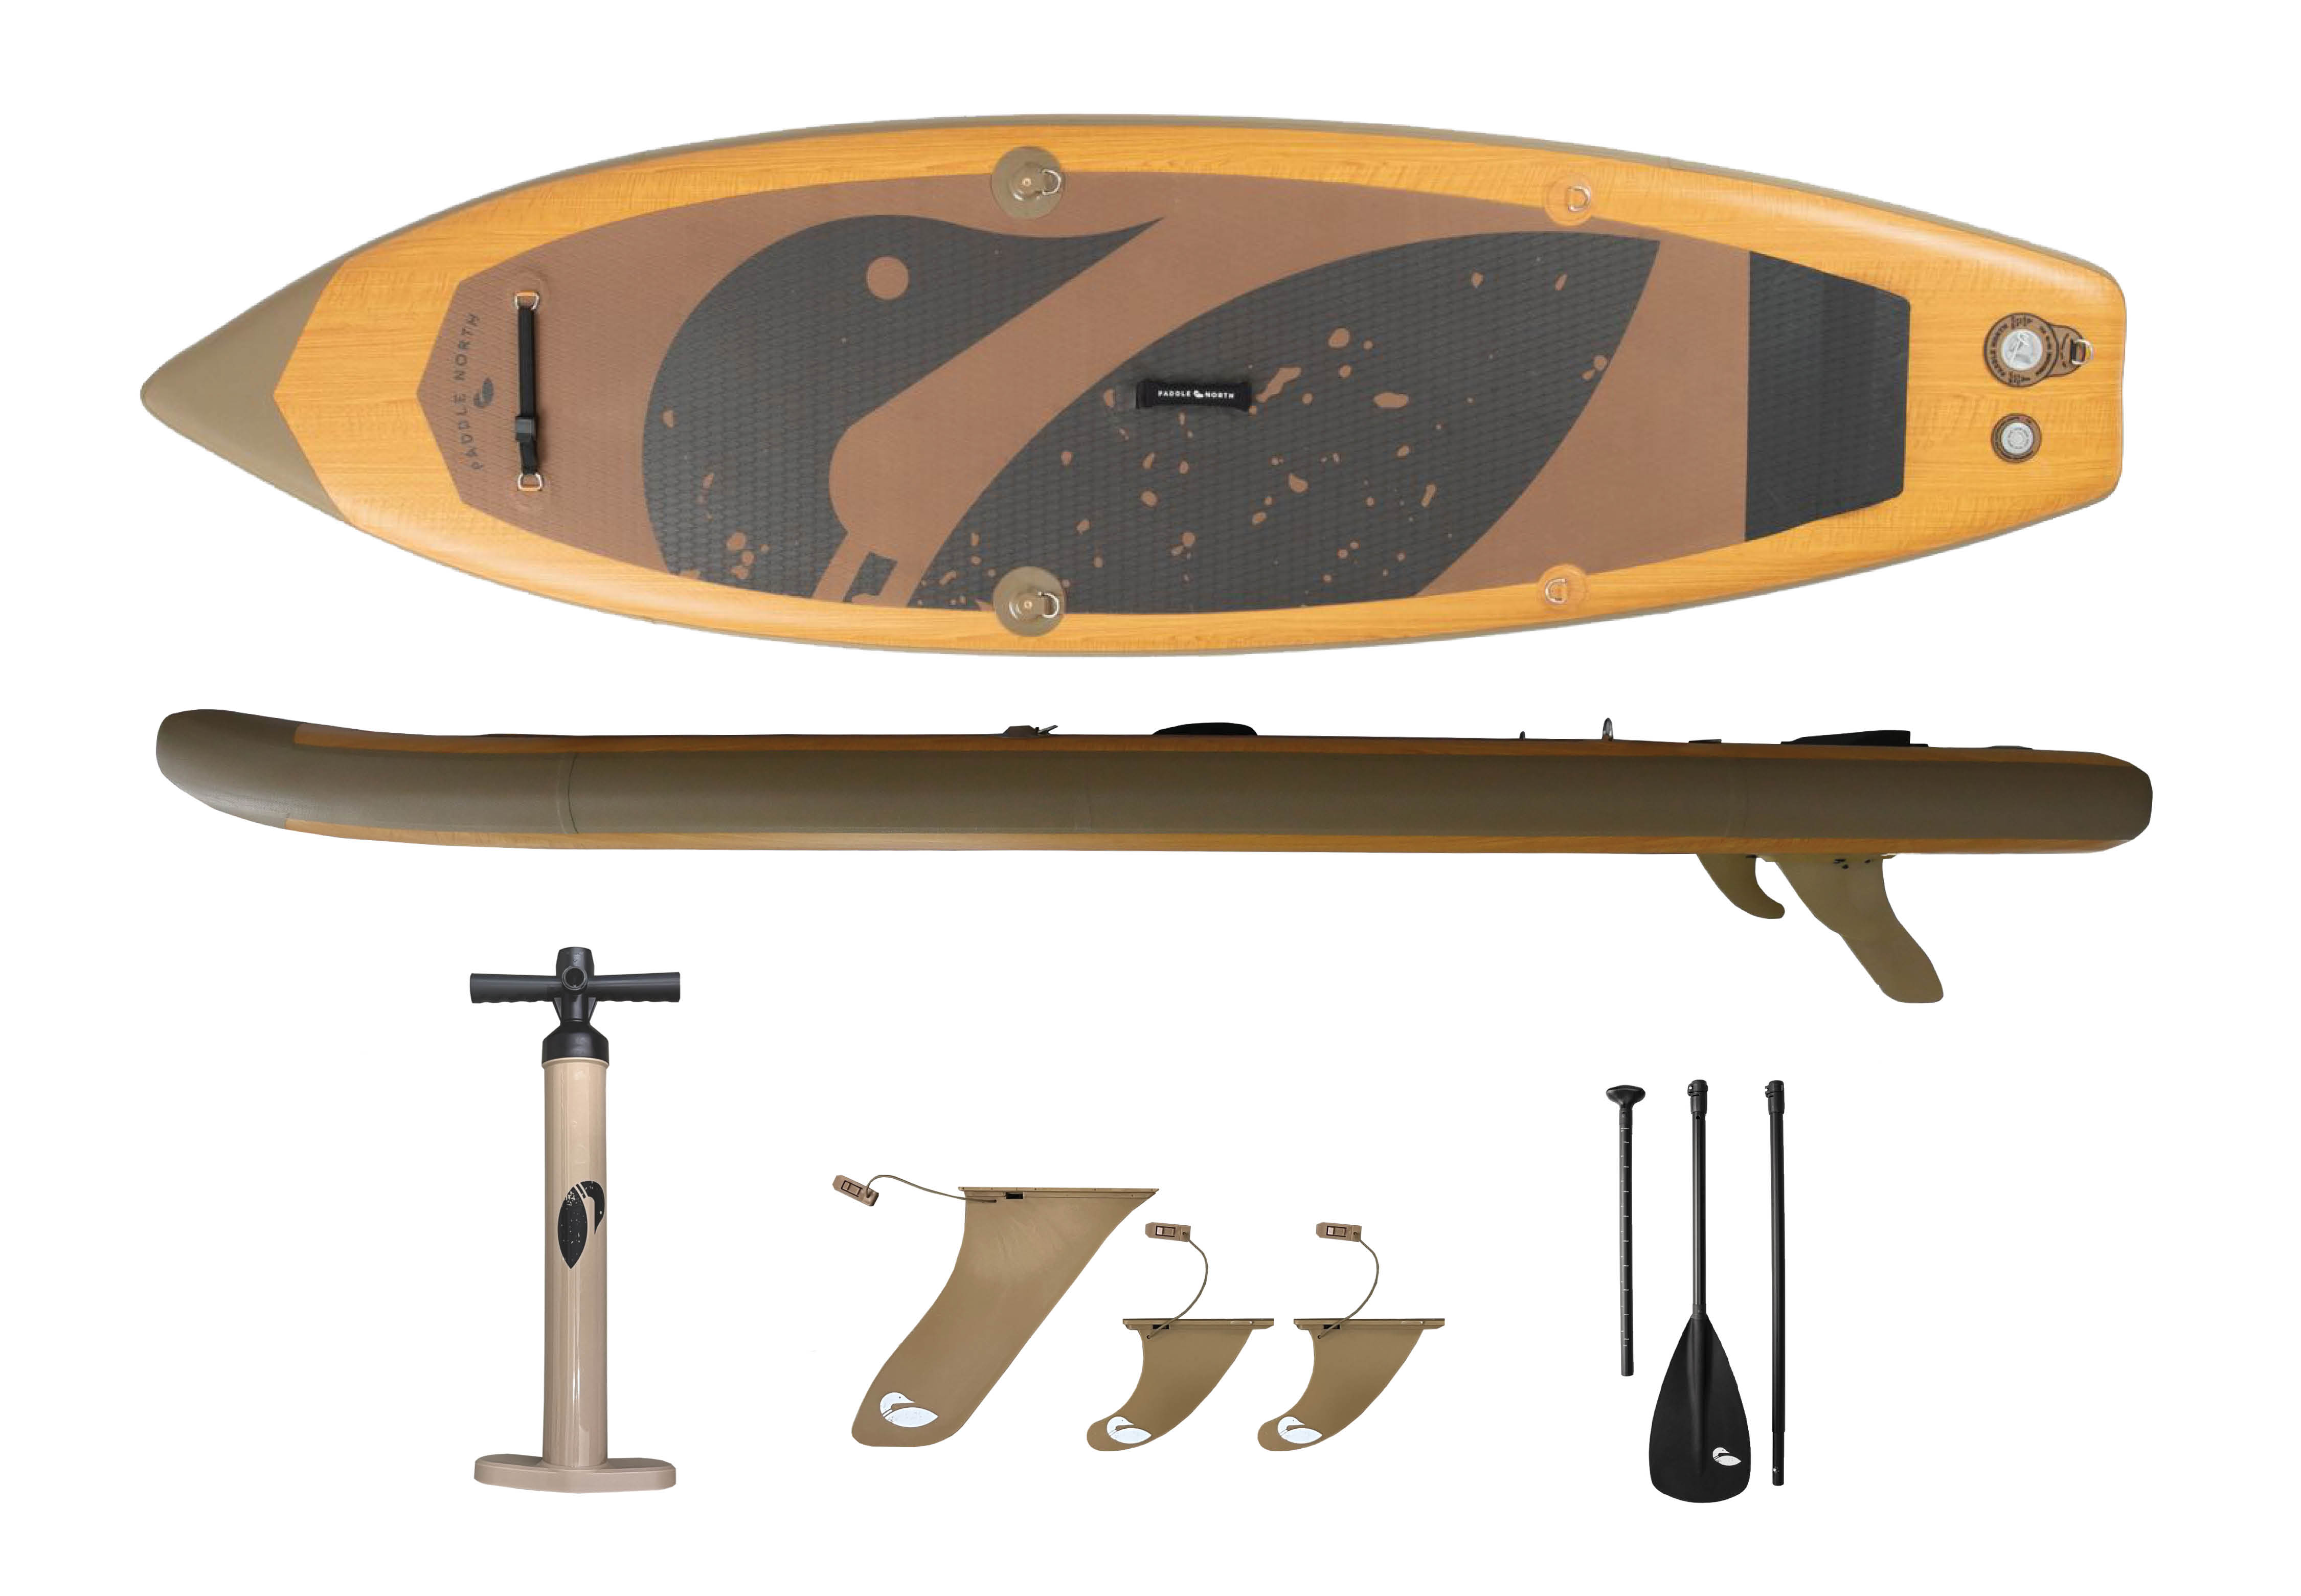 The Play, Inflatable Stand Up Paddle Board